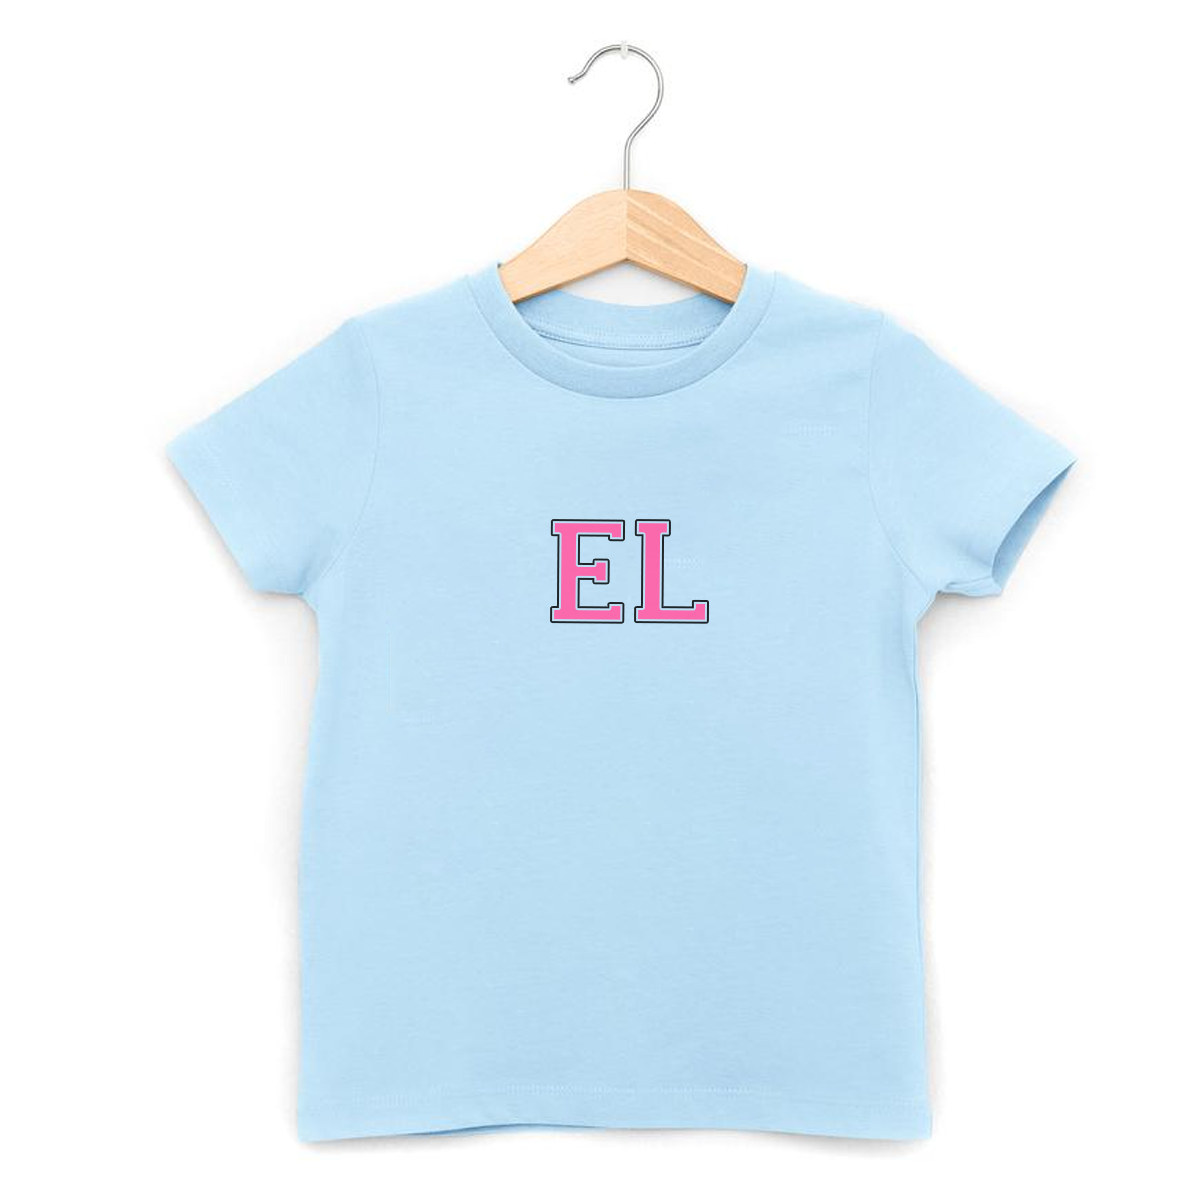 MiniVIP© Personalised Varisty Letters Baby Blue T-Shirt